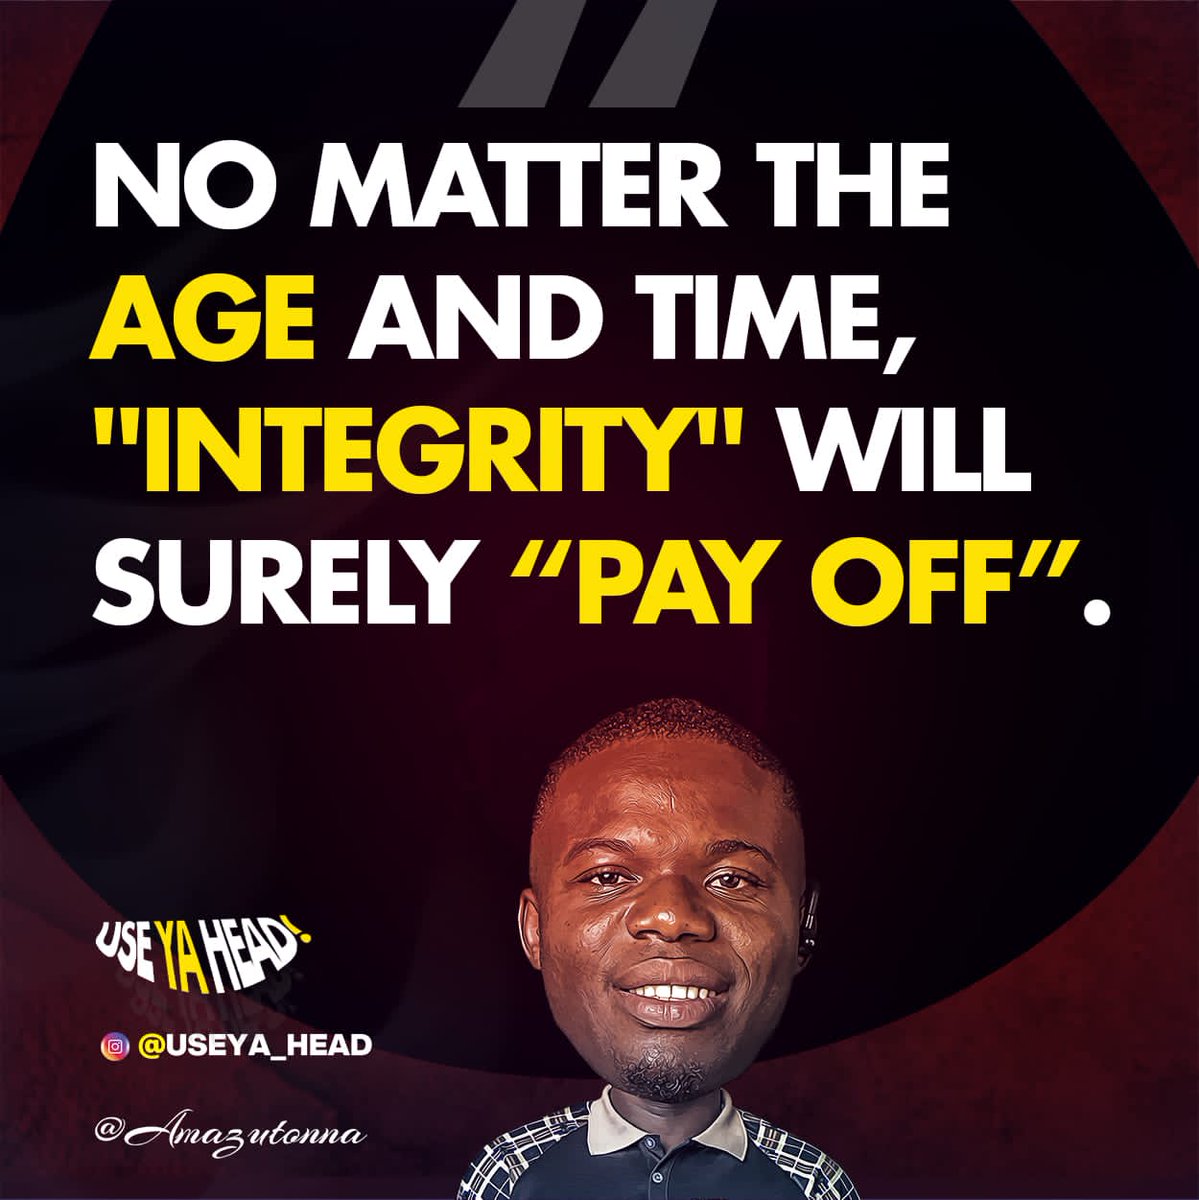 Have and build integrity in whatever you do..... It will surely pay off.... #useyourhead #useya_head